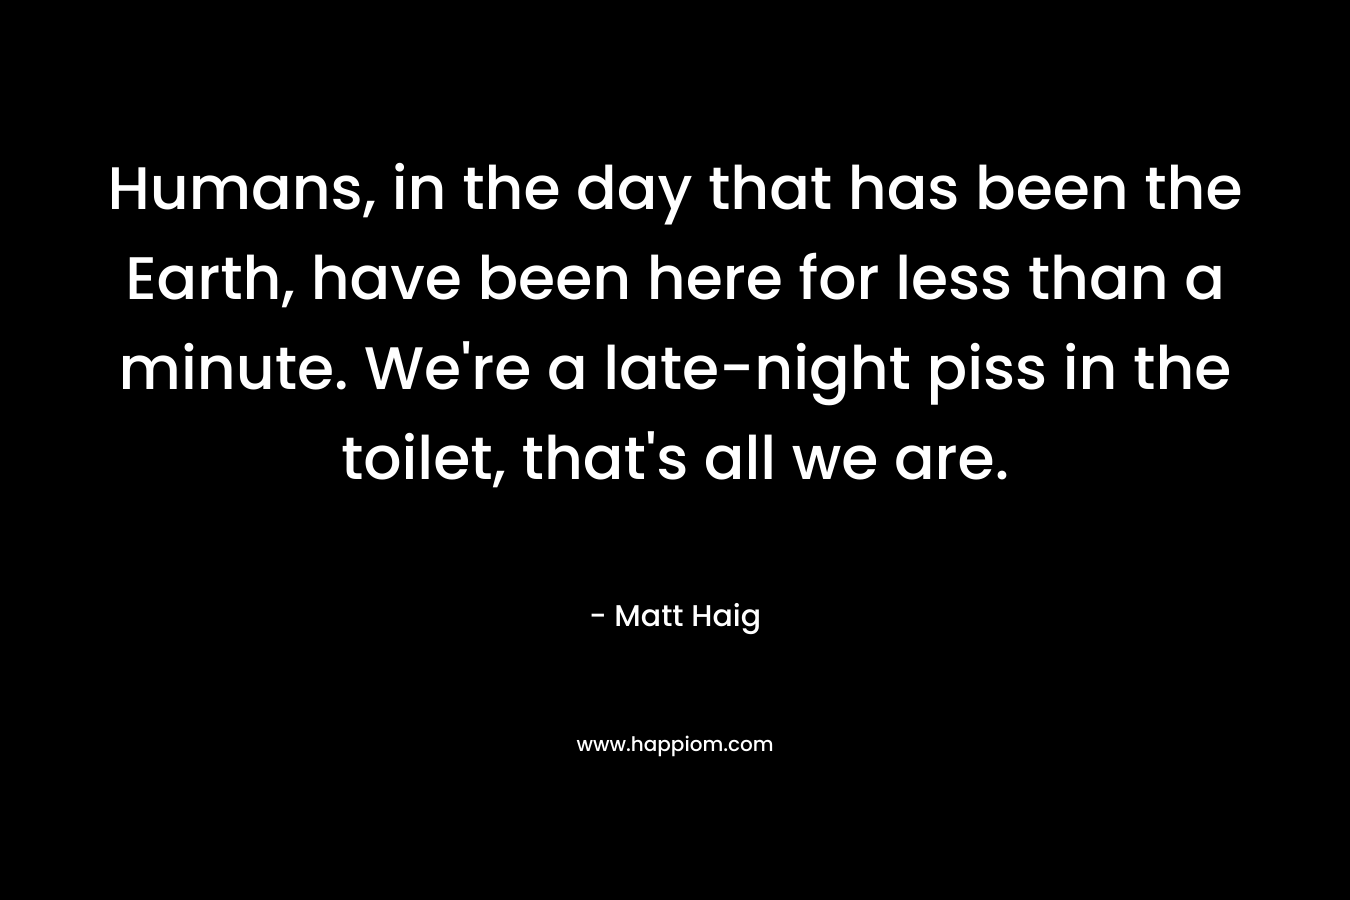 Humans, in the day that has been the Earth, have been here for less than a minute. We’re a late-night piss in the toilet, that’s all we are. – Matt Haig